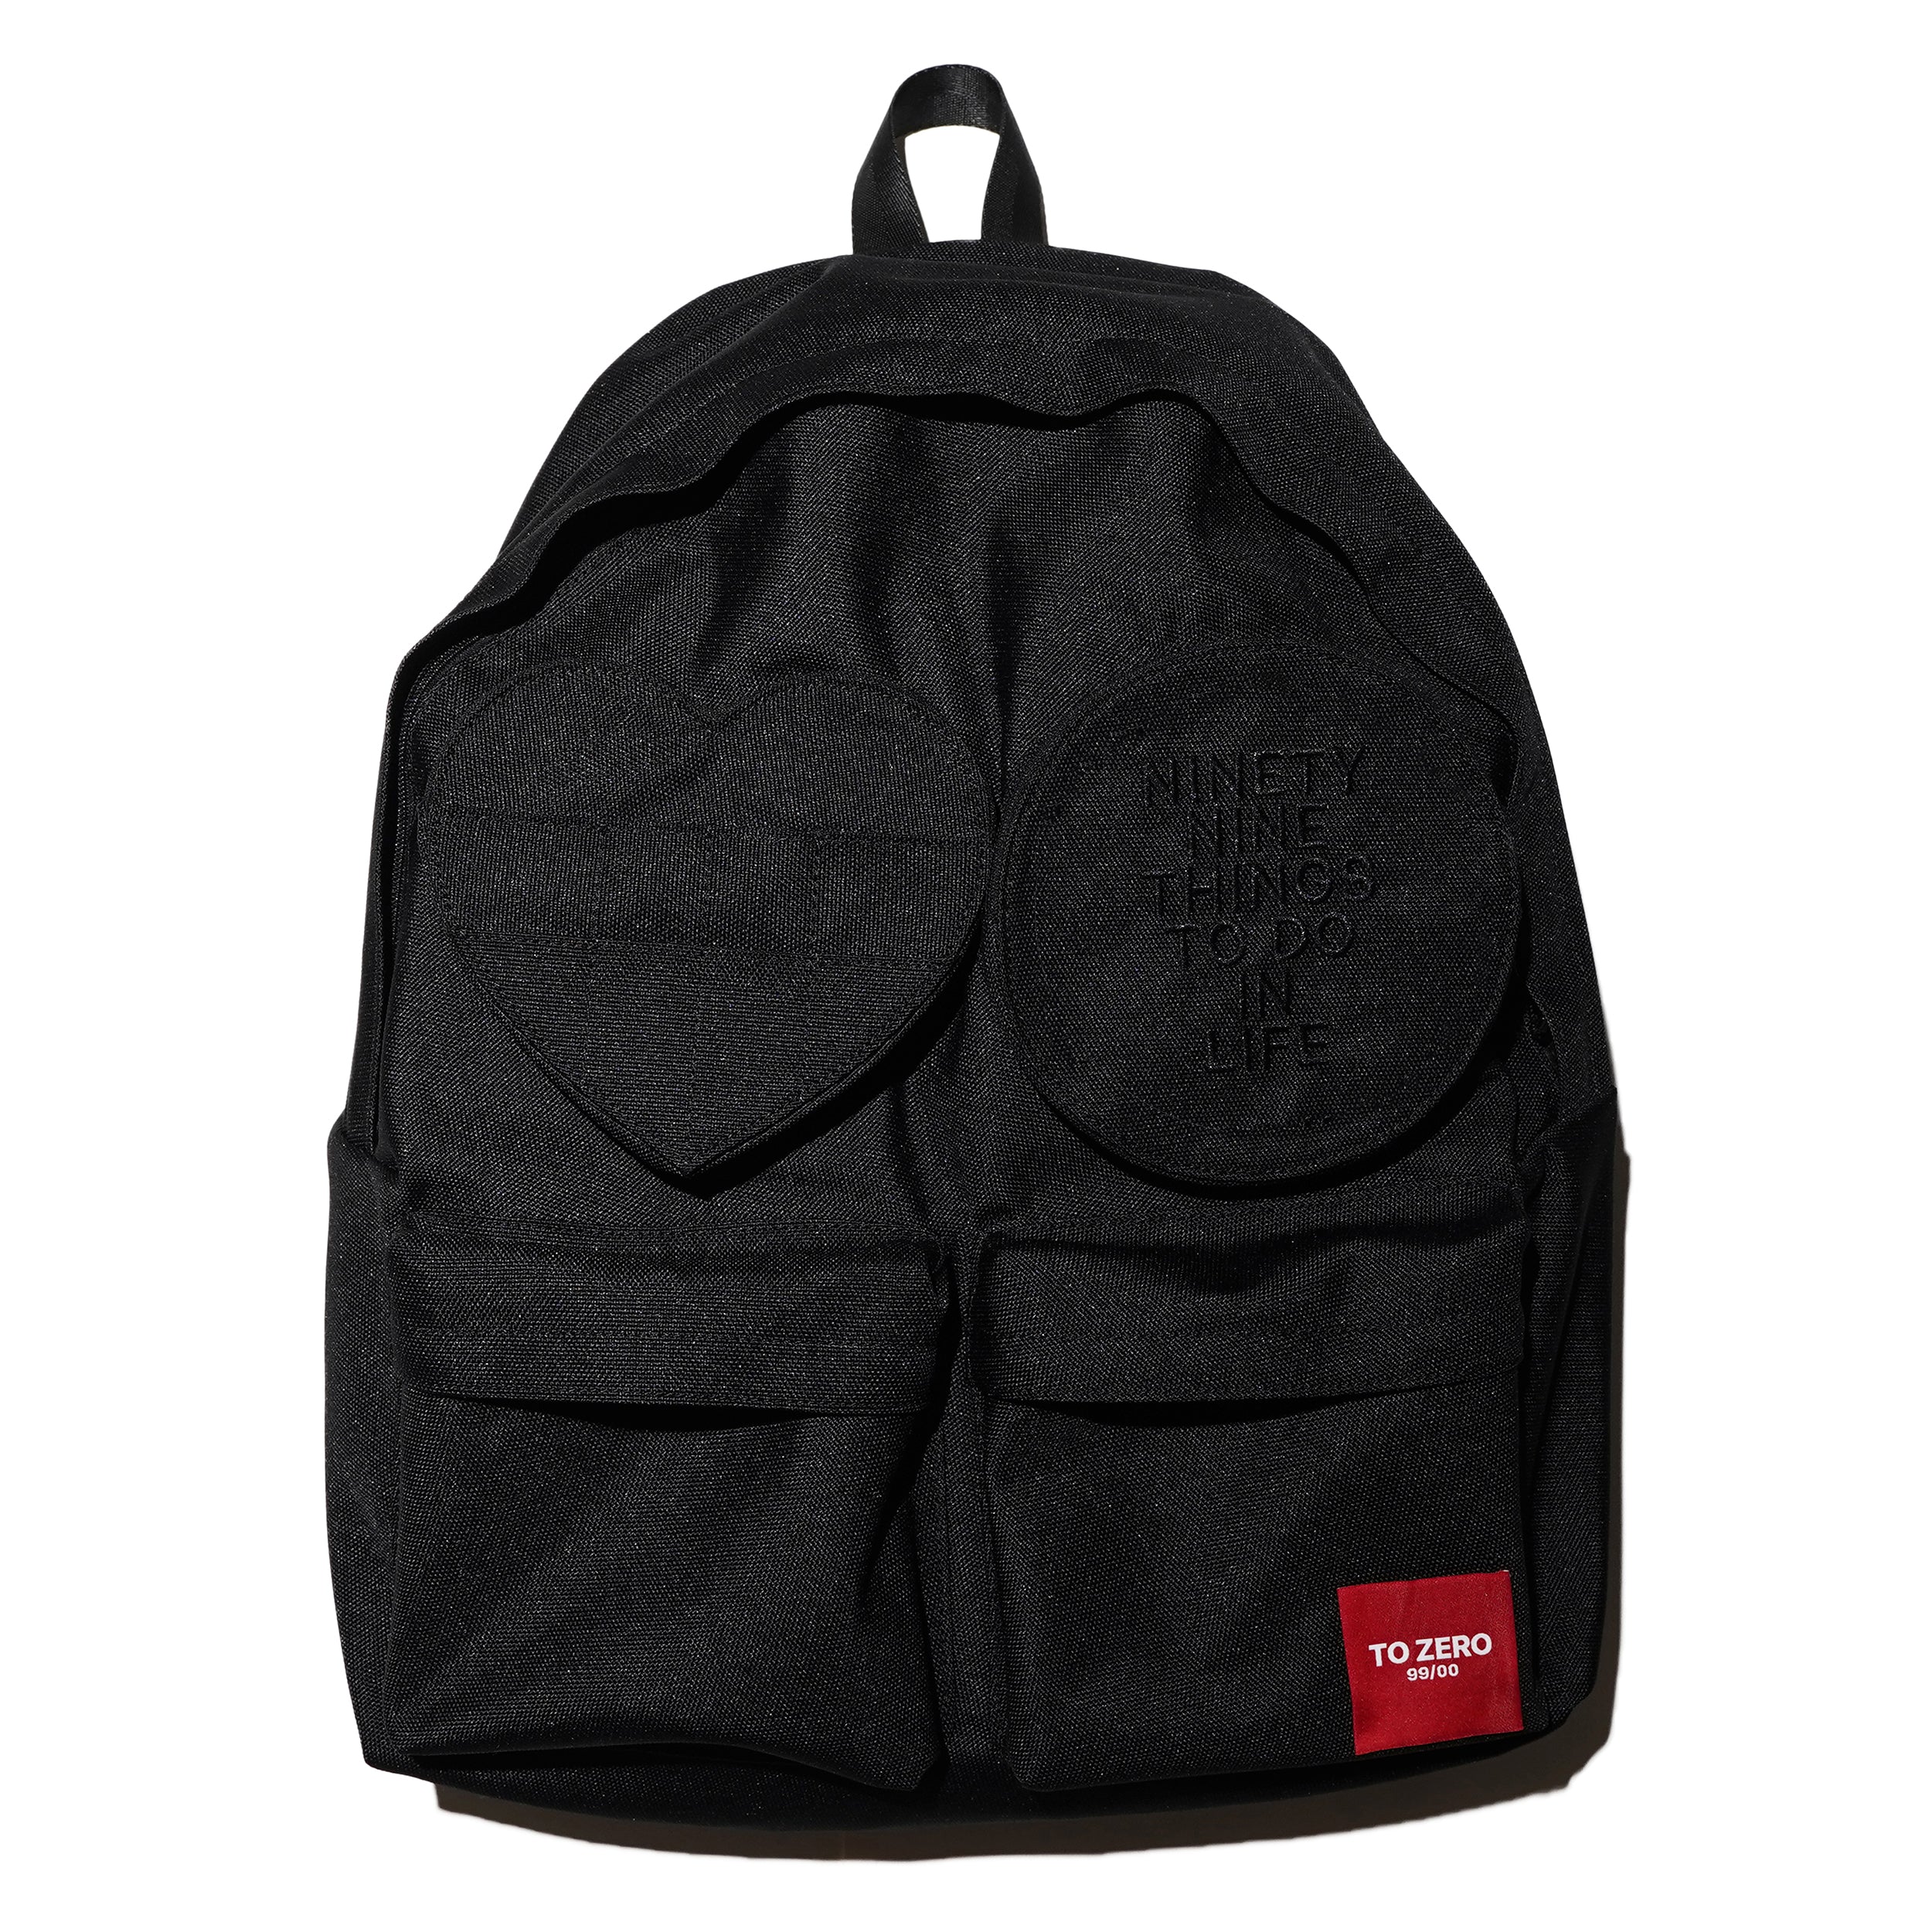 'MORE LOVE <3' BACKPACK